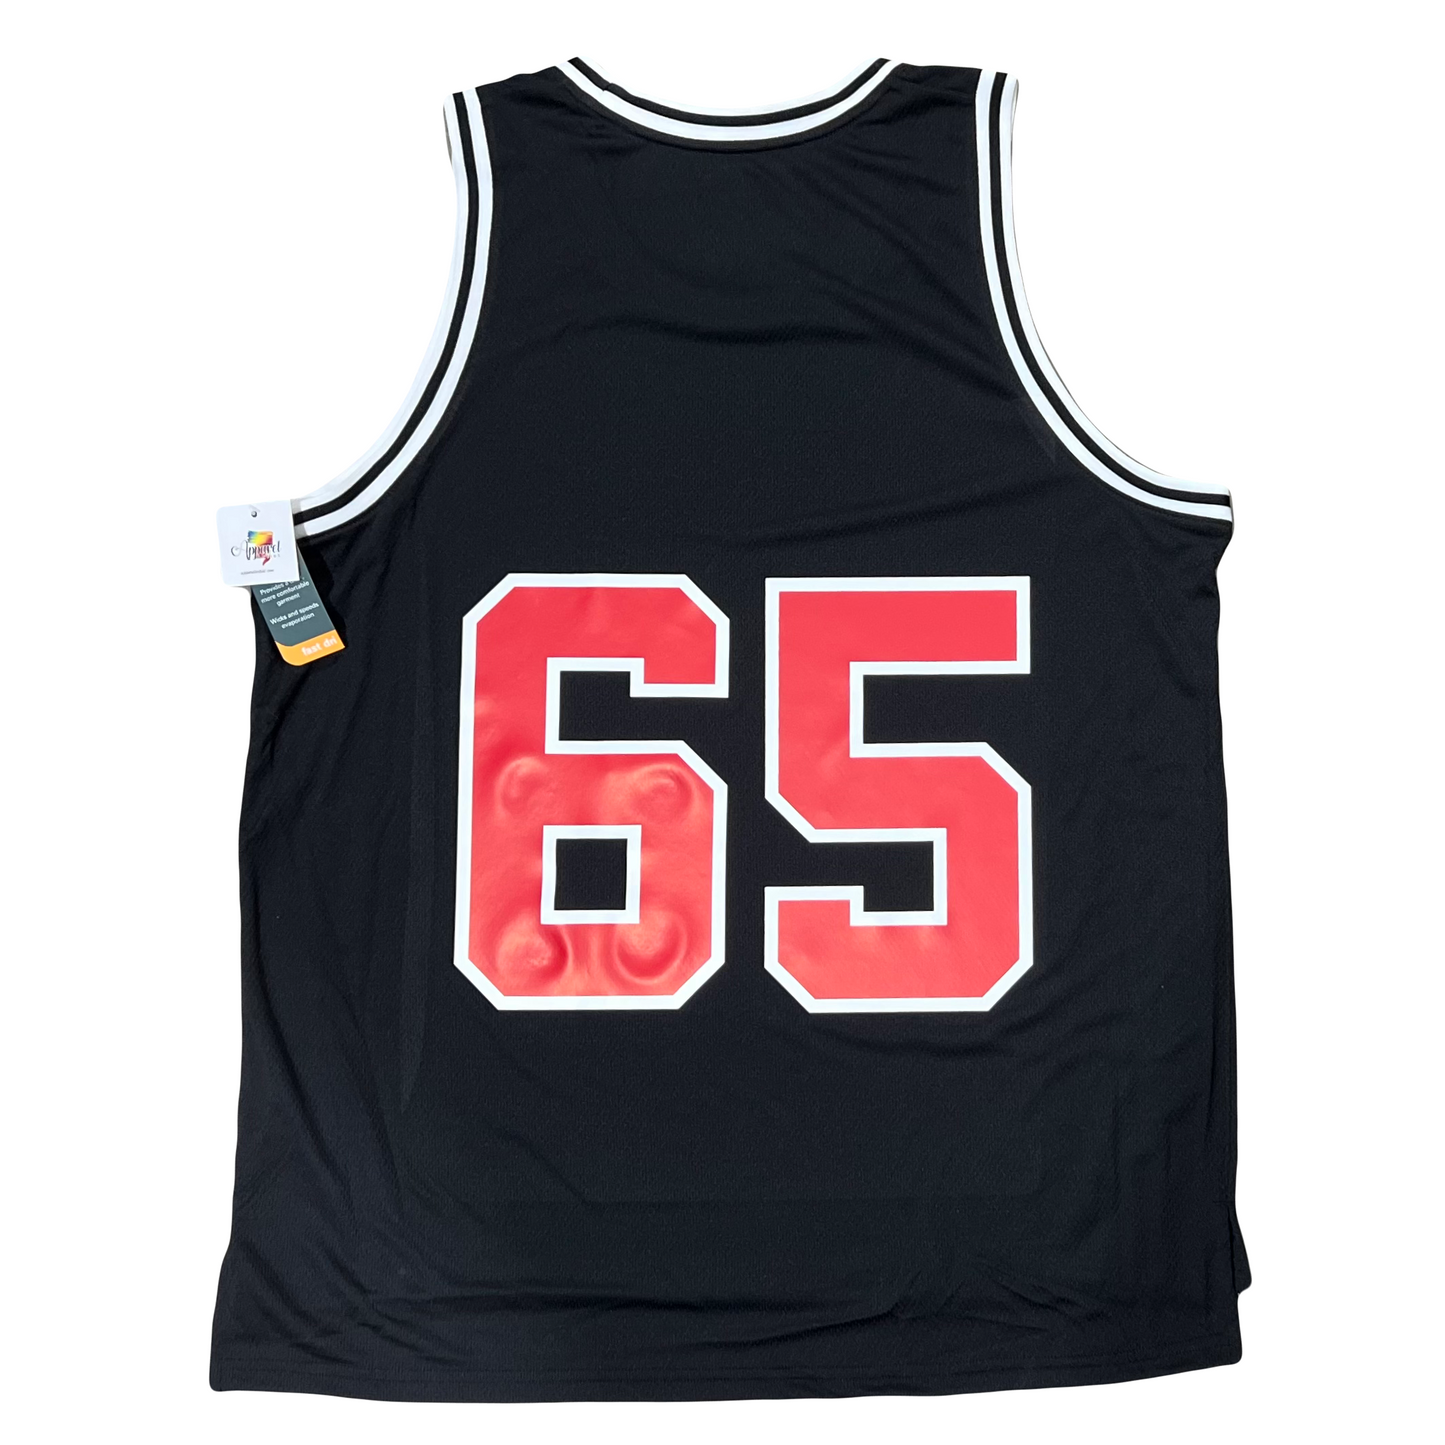 Custom Made Basketball Jersey Add Your Number From 1 to 99